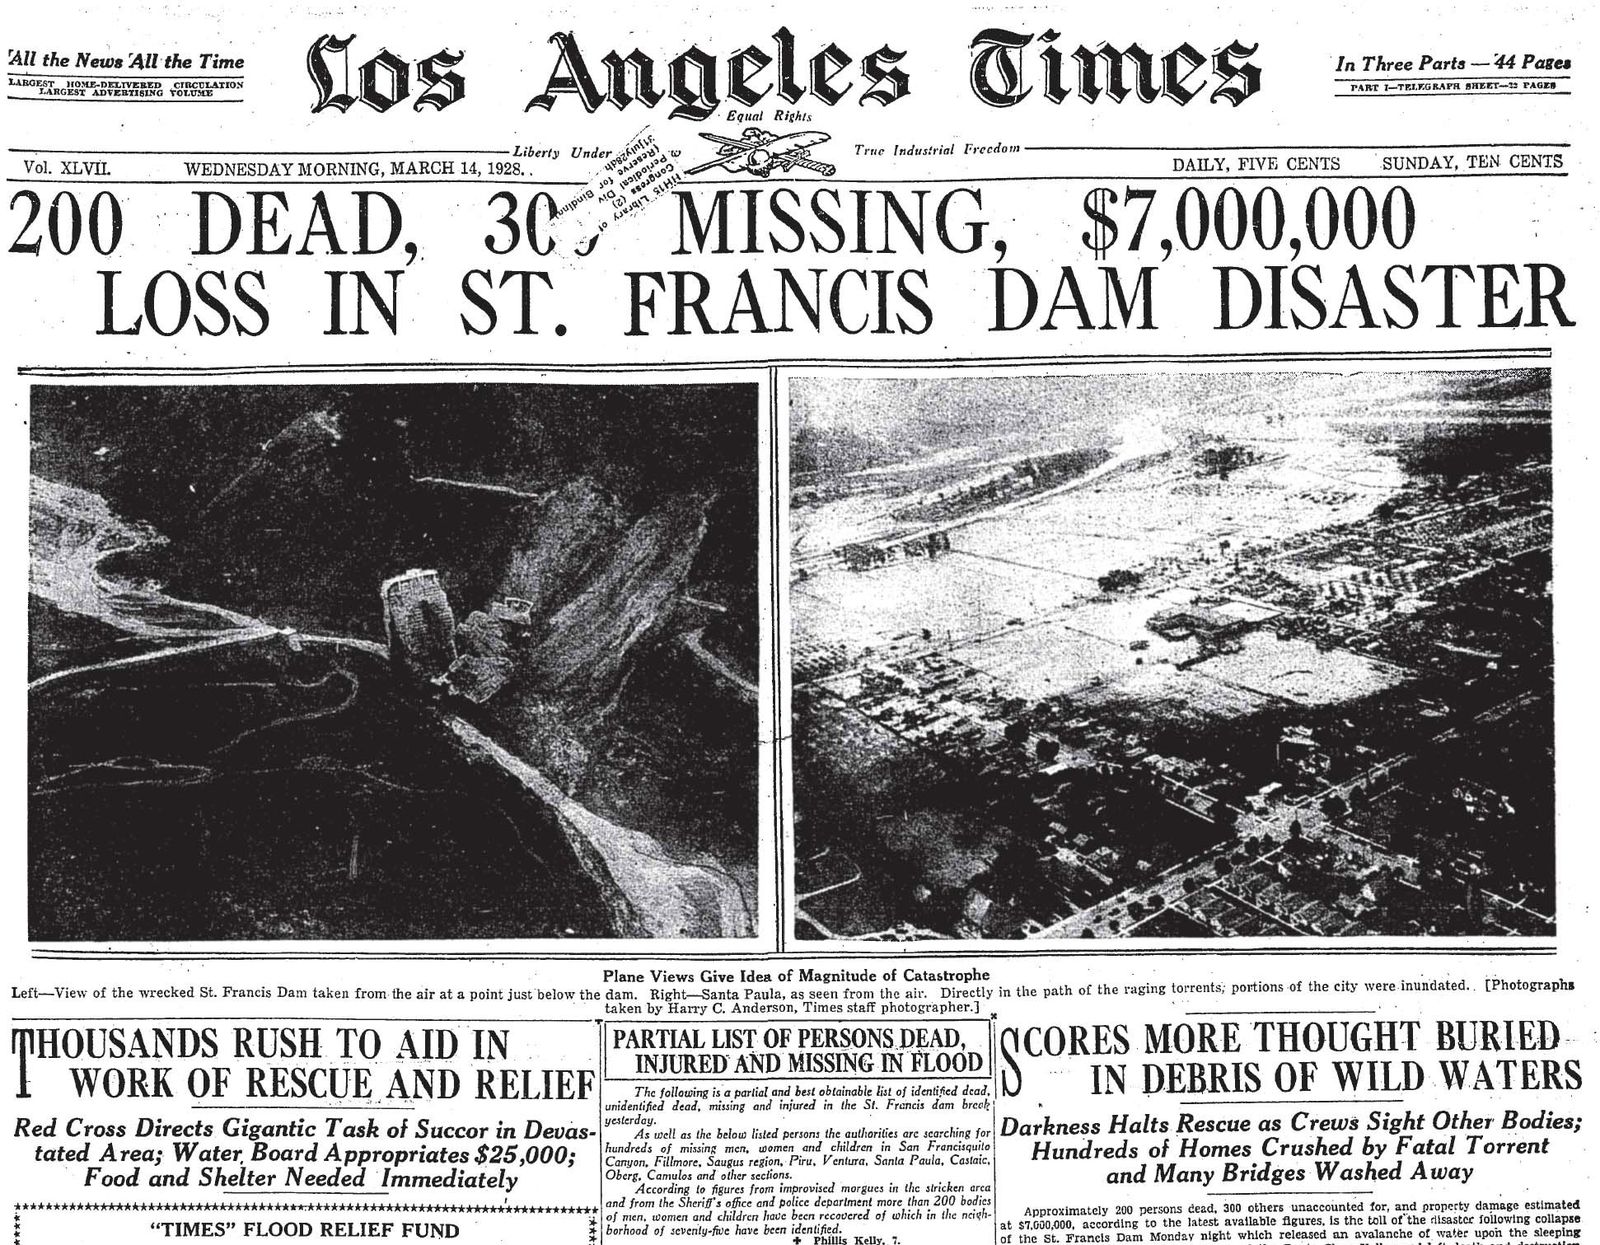 On Occasions Like This, I Envy the Dead: The St. Francis Dam Disaster, History